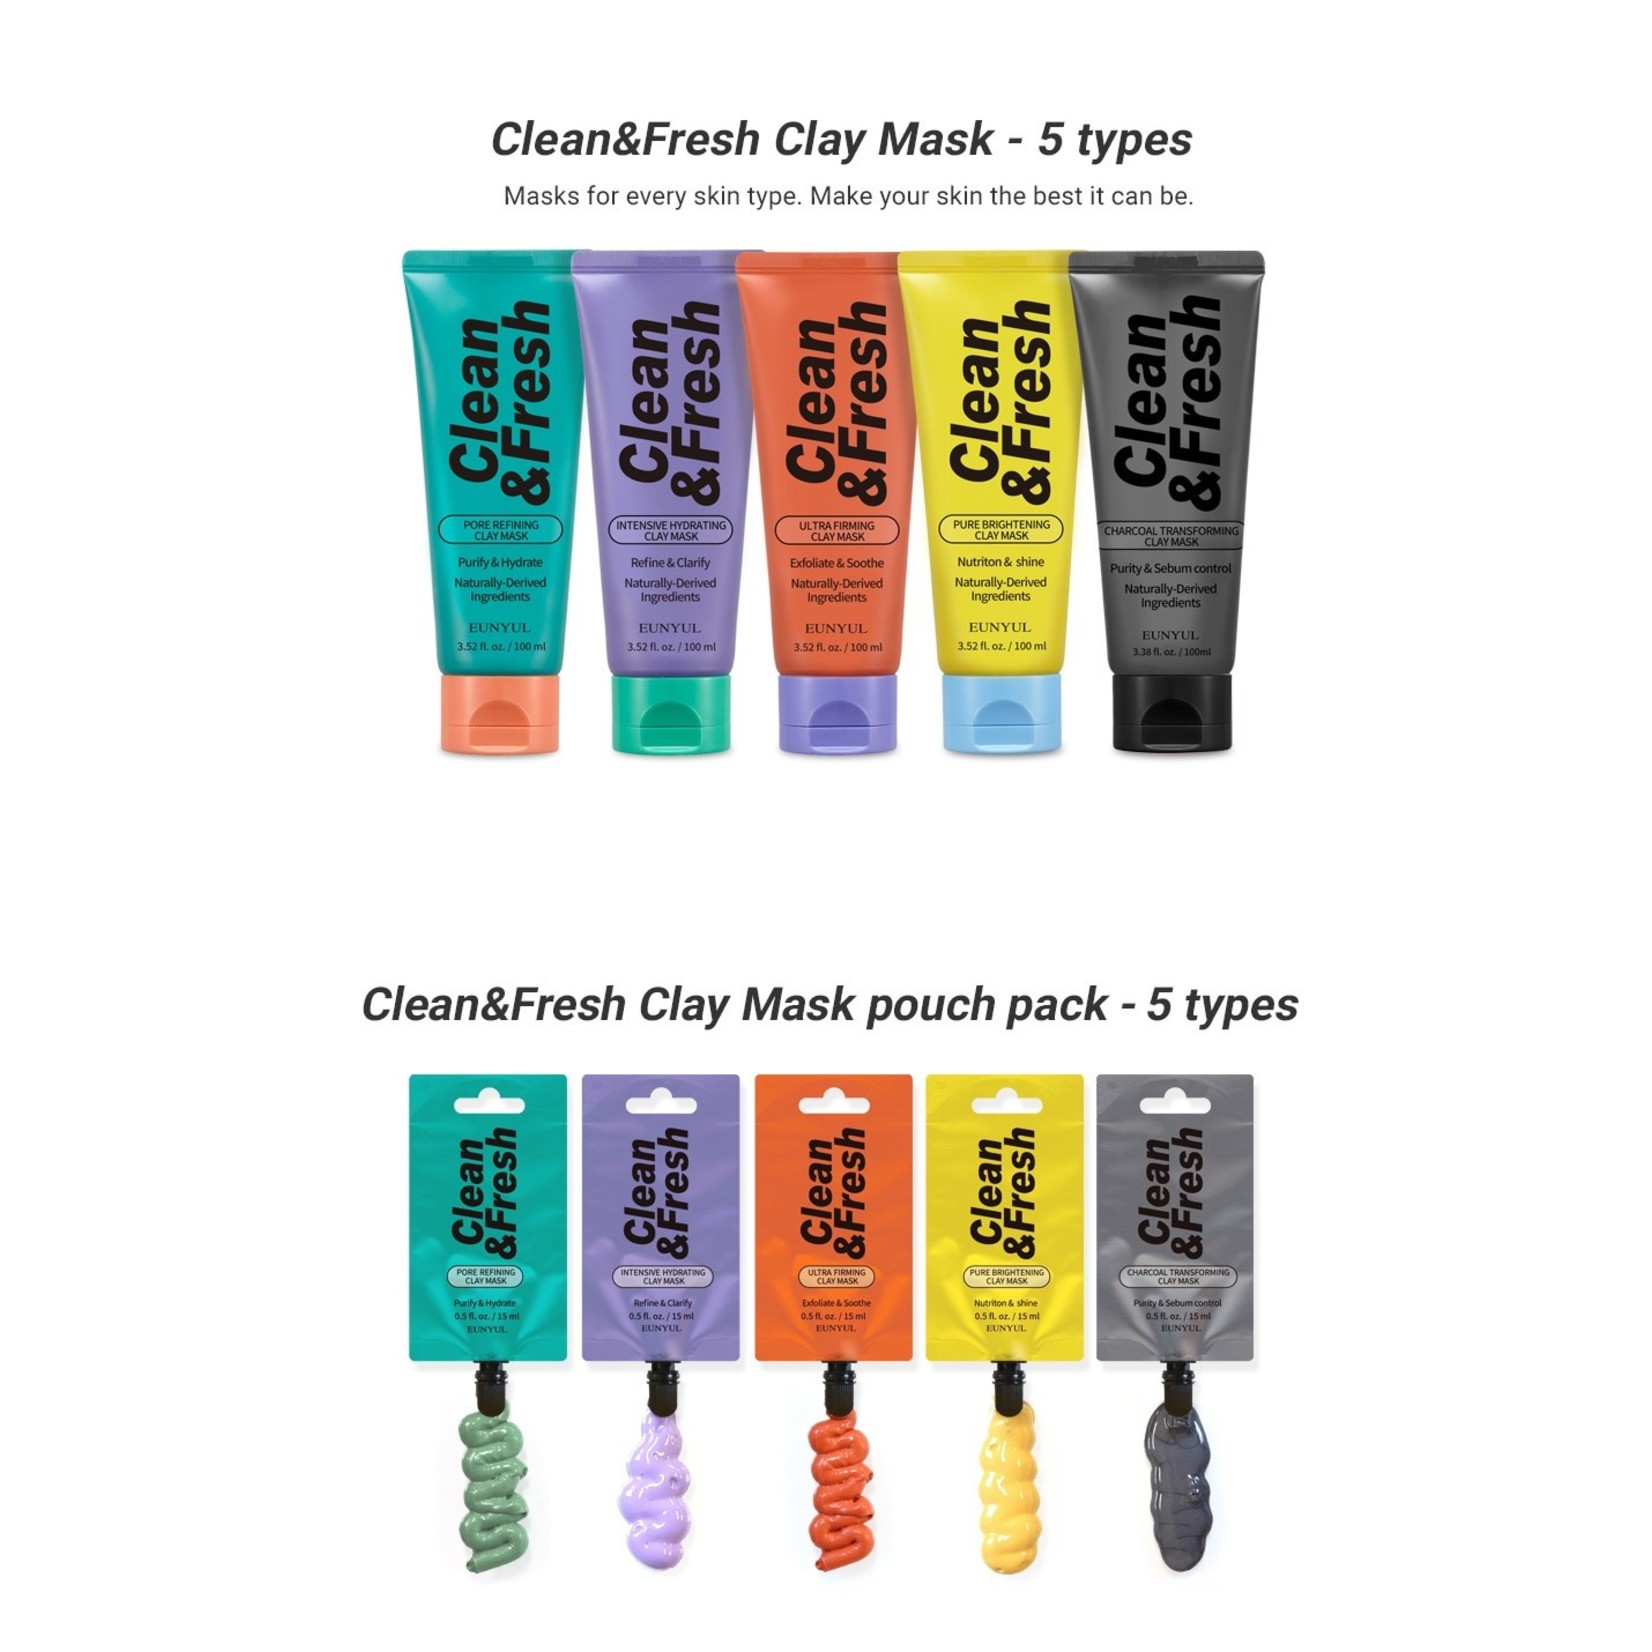 Clean & Fresh Clay Mask Pouch Pack - Charcoal Transforming